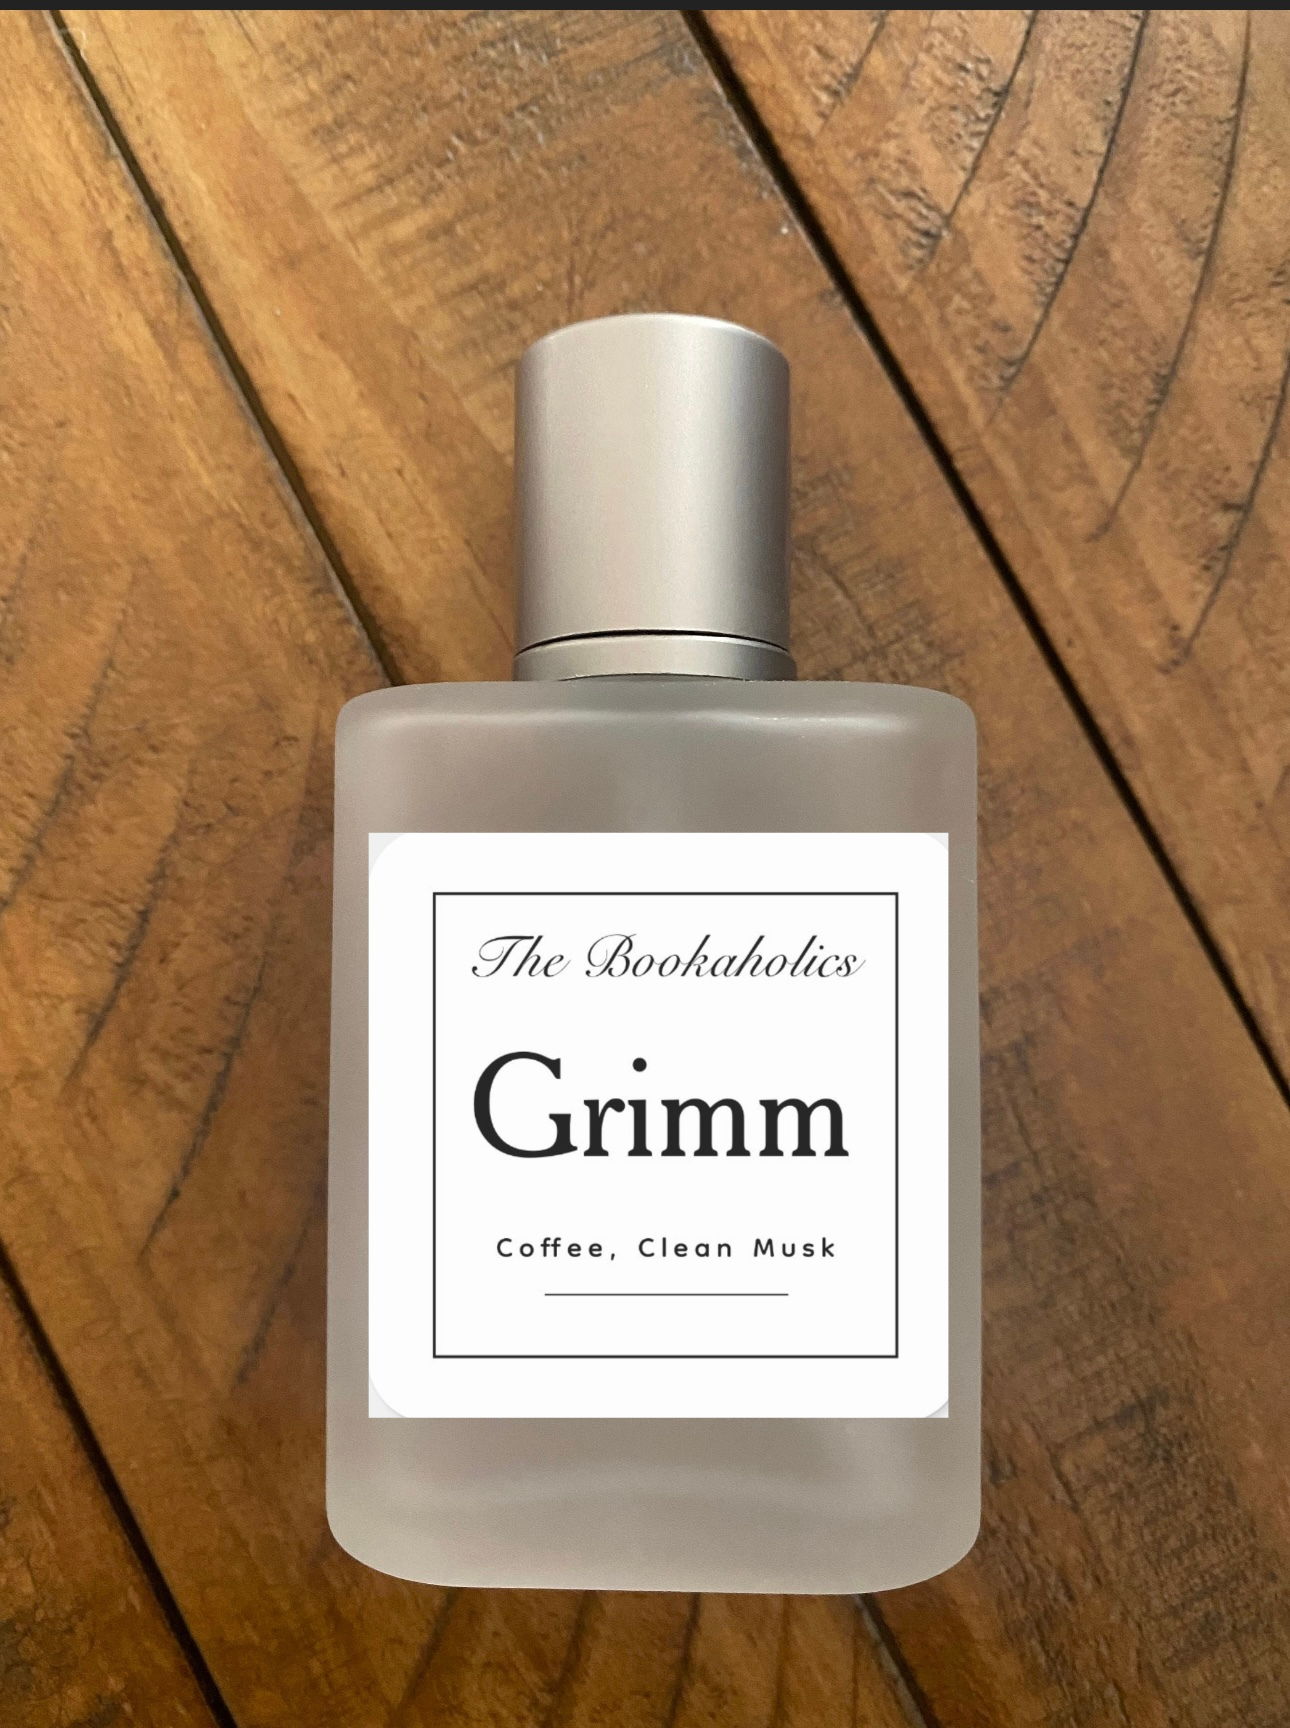 Grimm: Officially Licensed cologne inspired by the Sisters Solstice